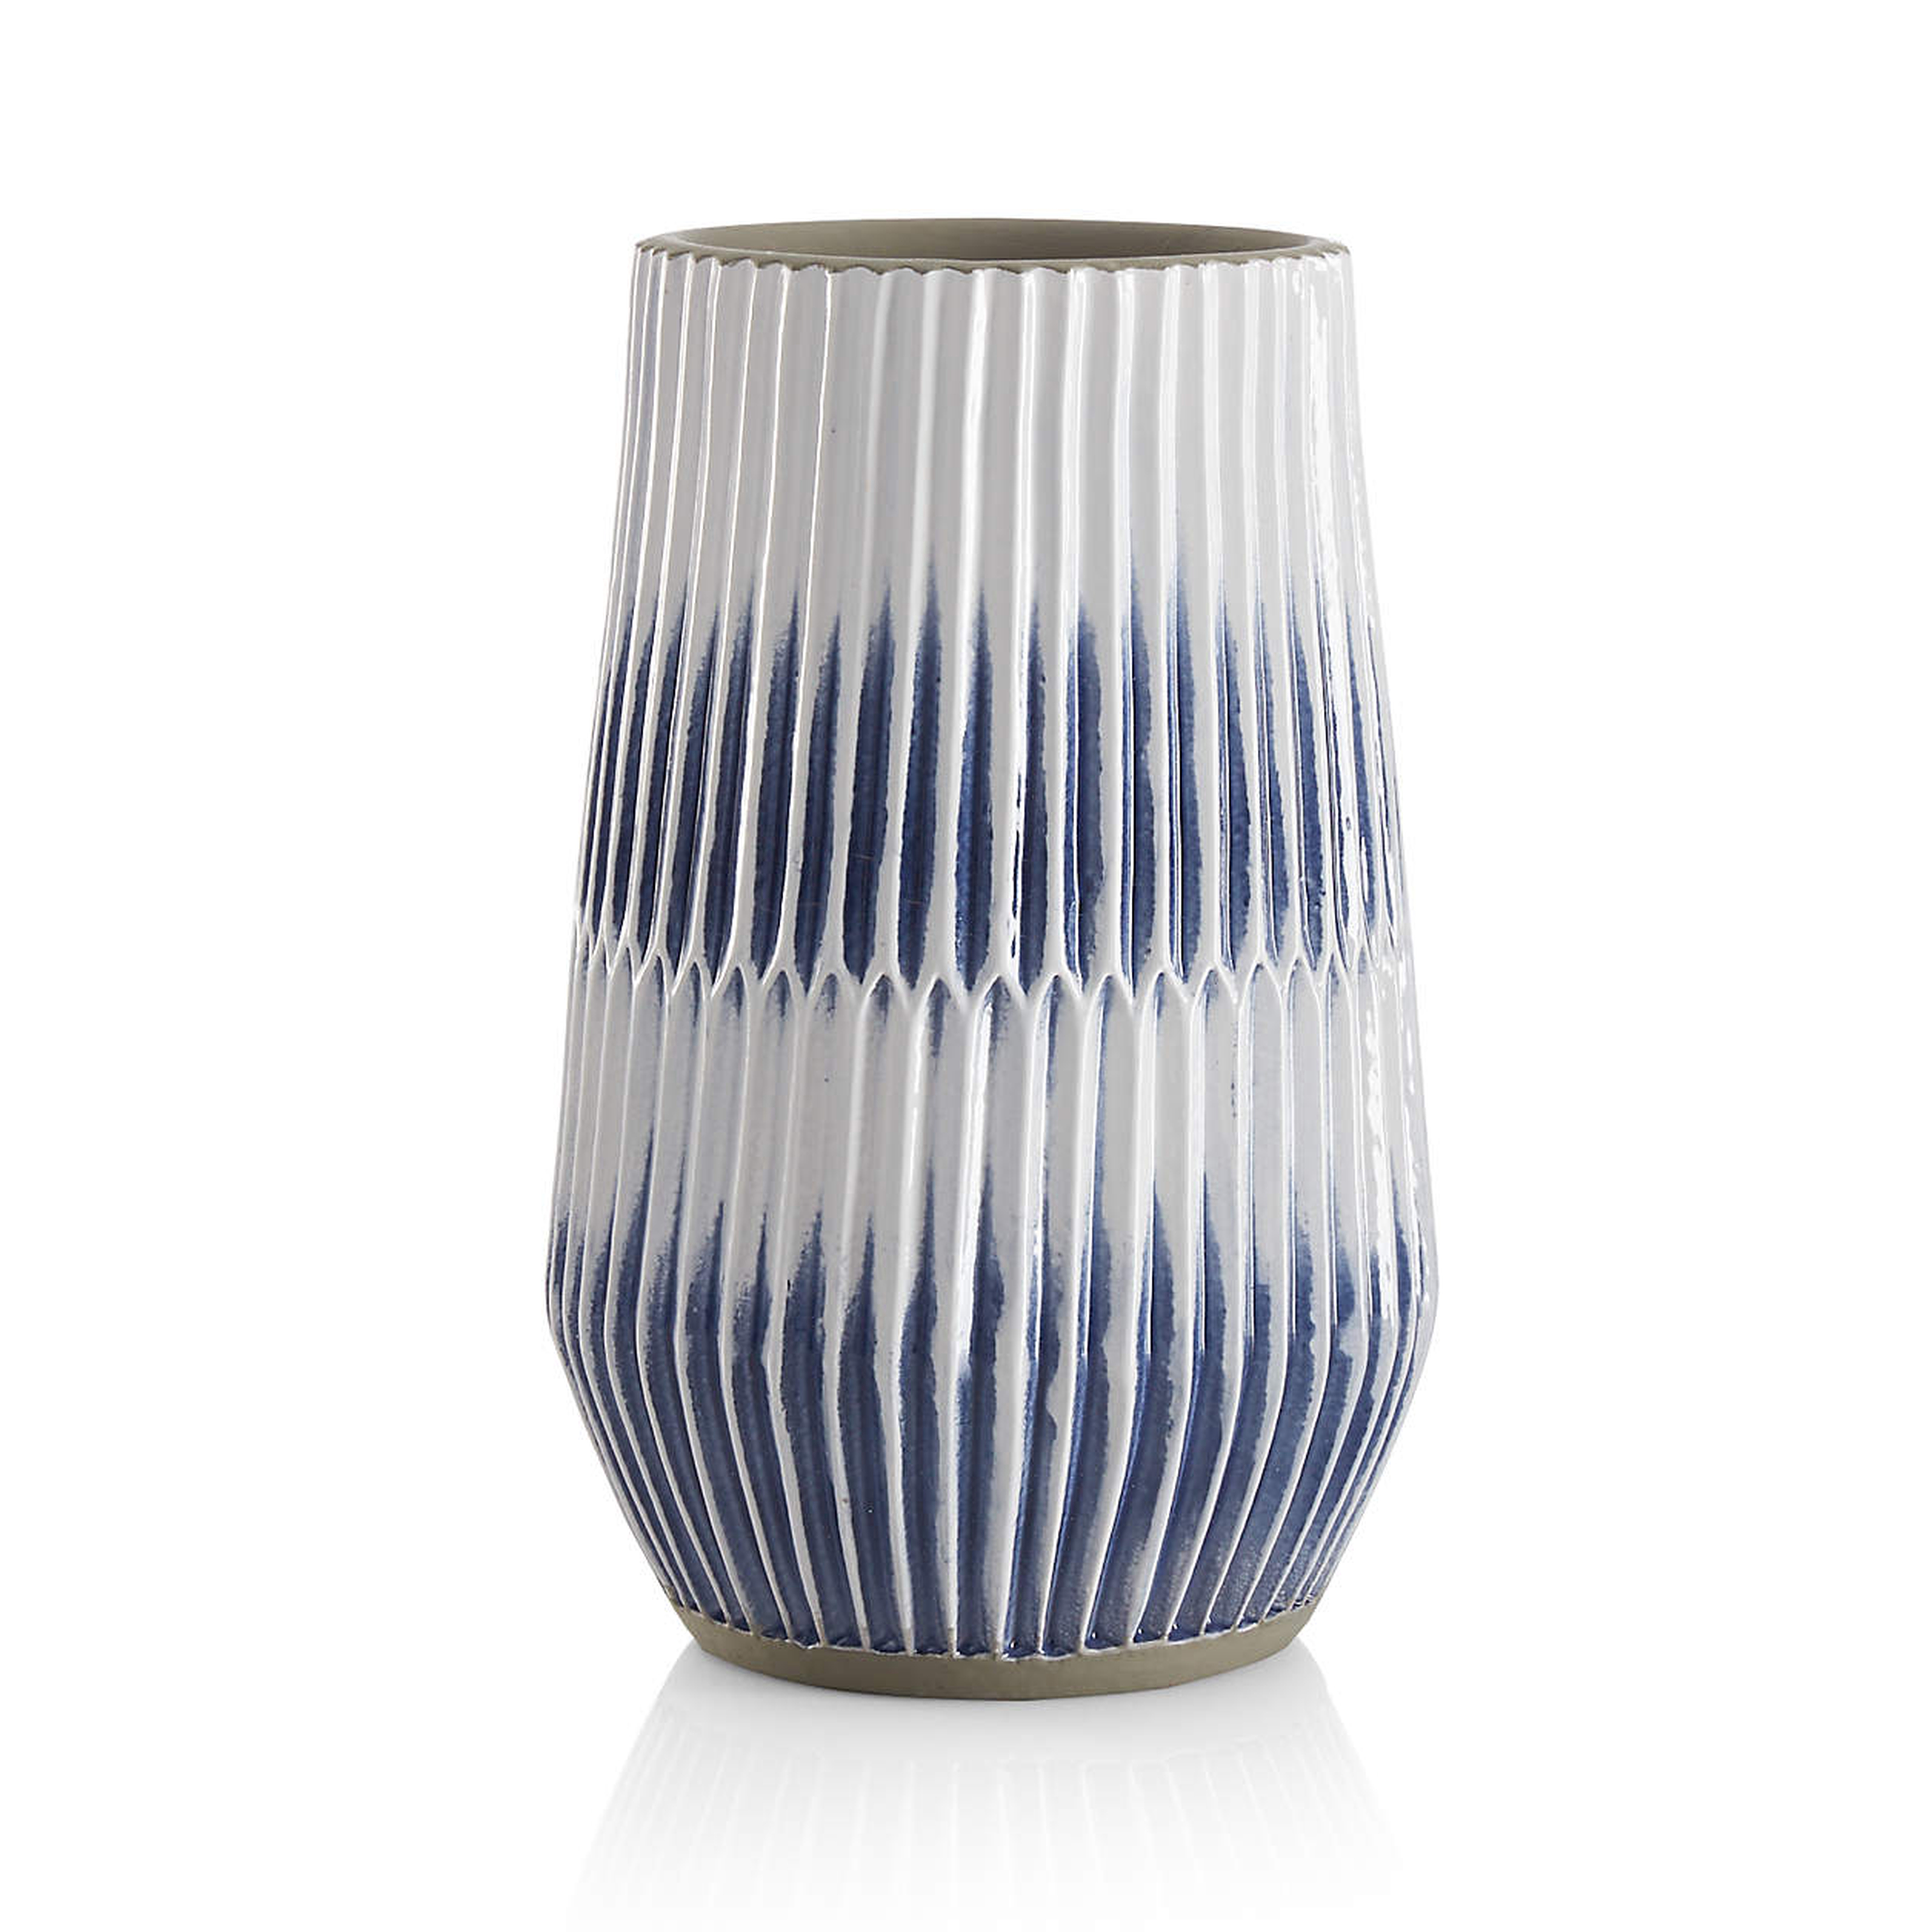 Piega Small Blue and White Vase - Crate and Barrel